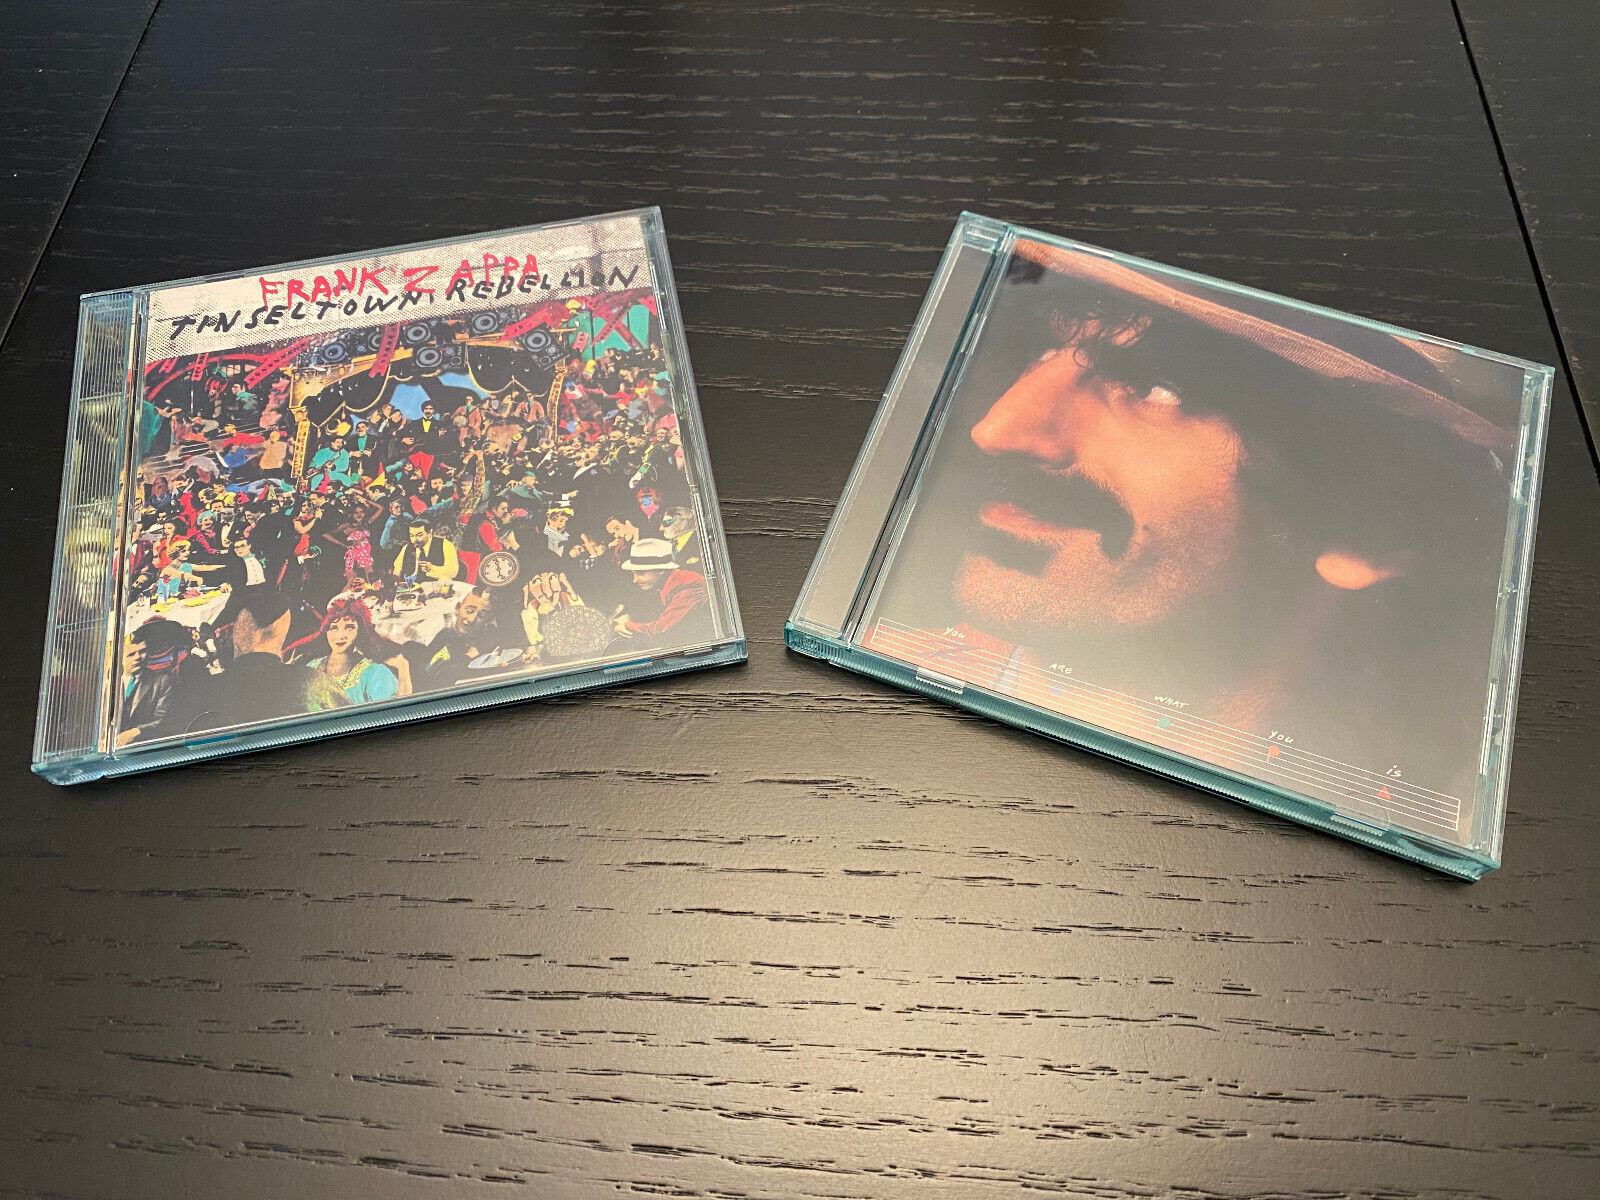 Frank Zappa - Tinsel Town Rebellion & You Are What You Is. Pair of Albums on CD